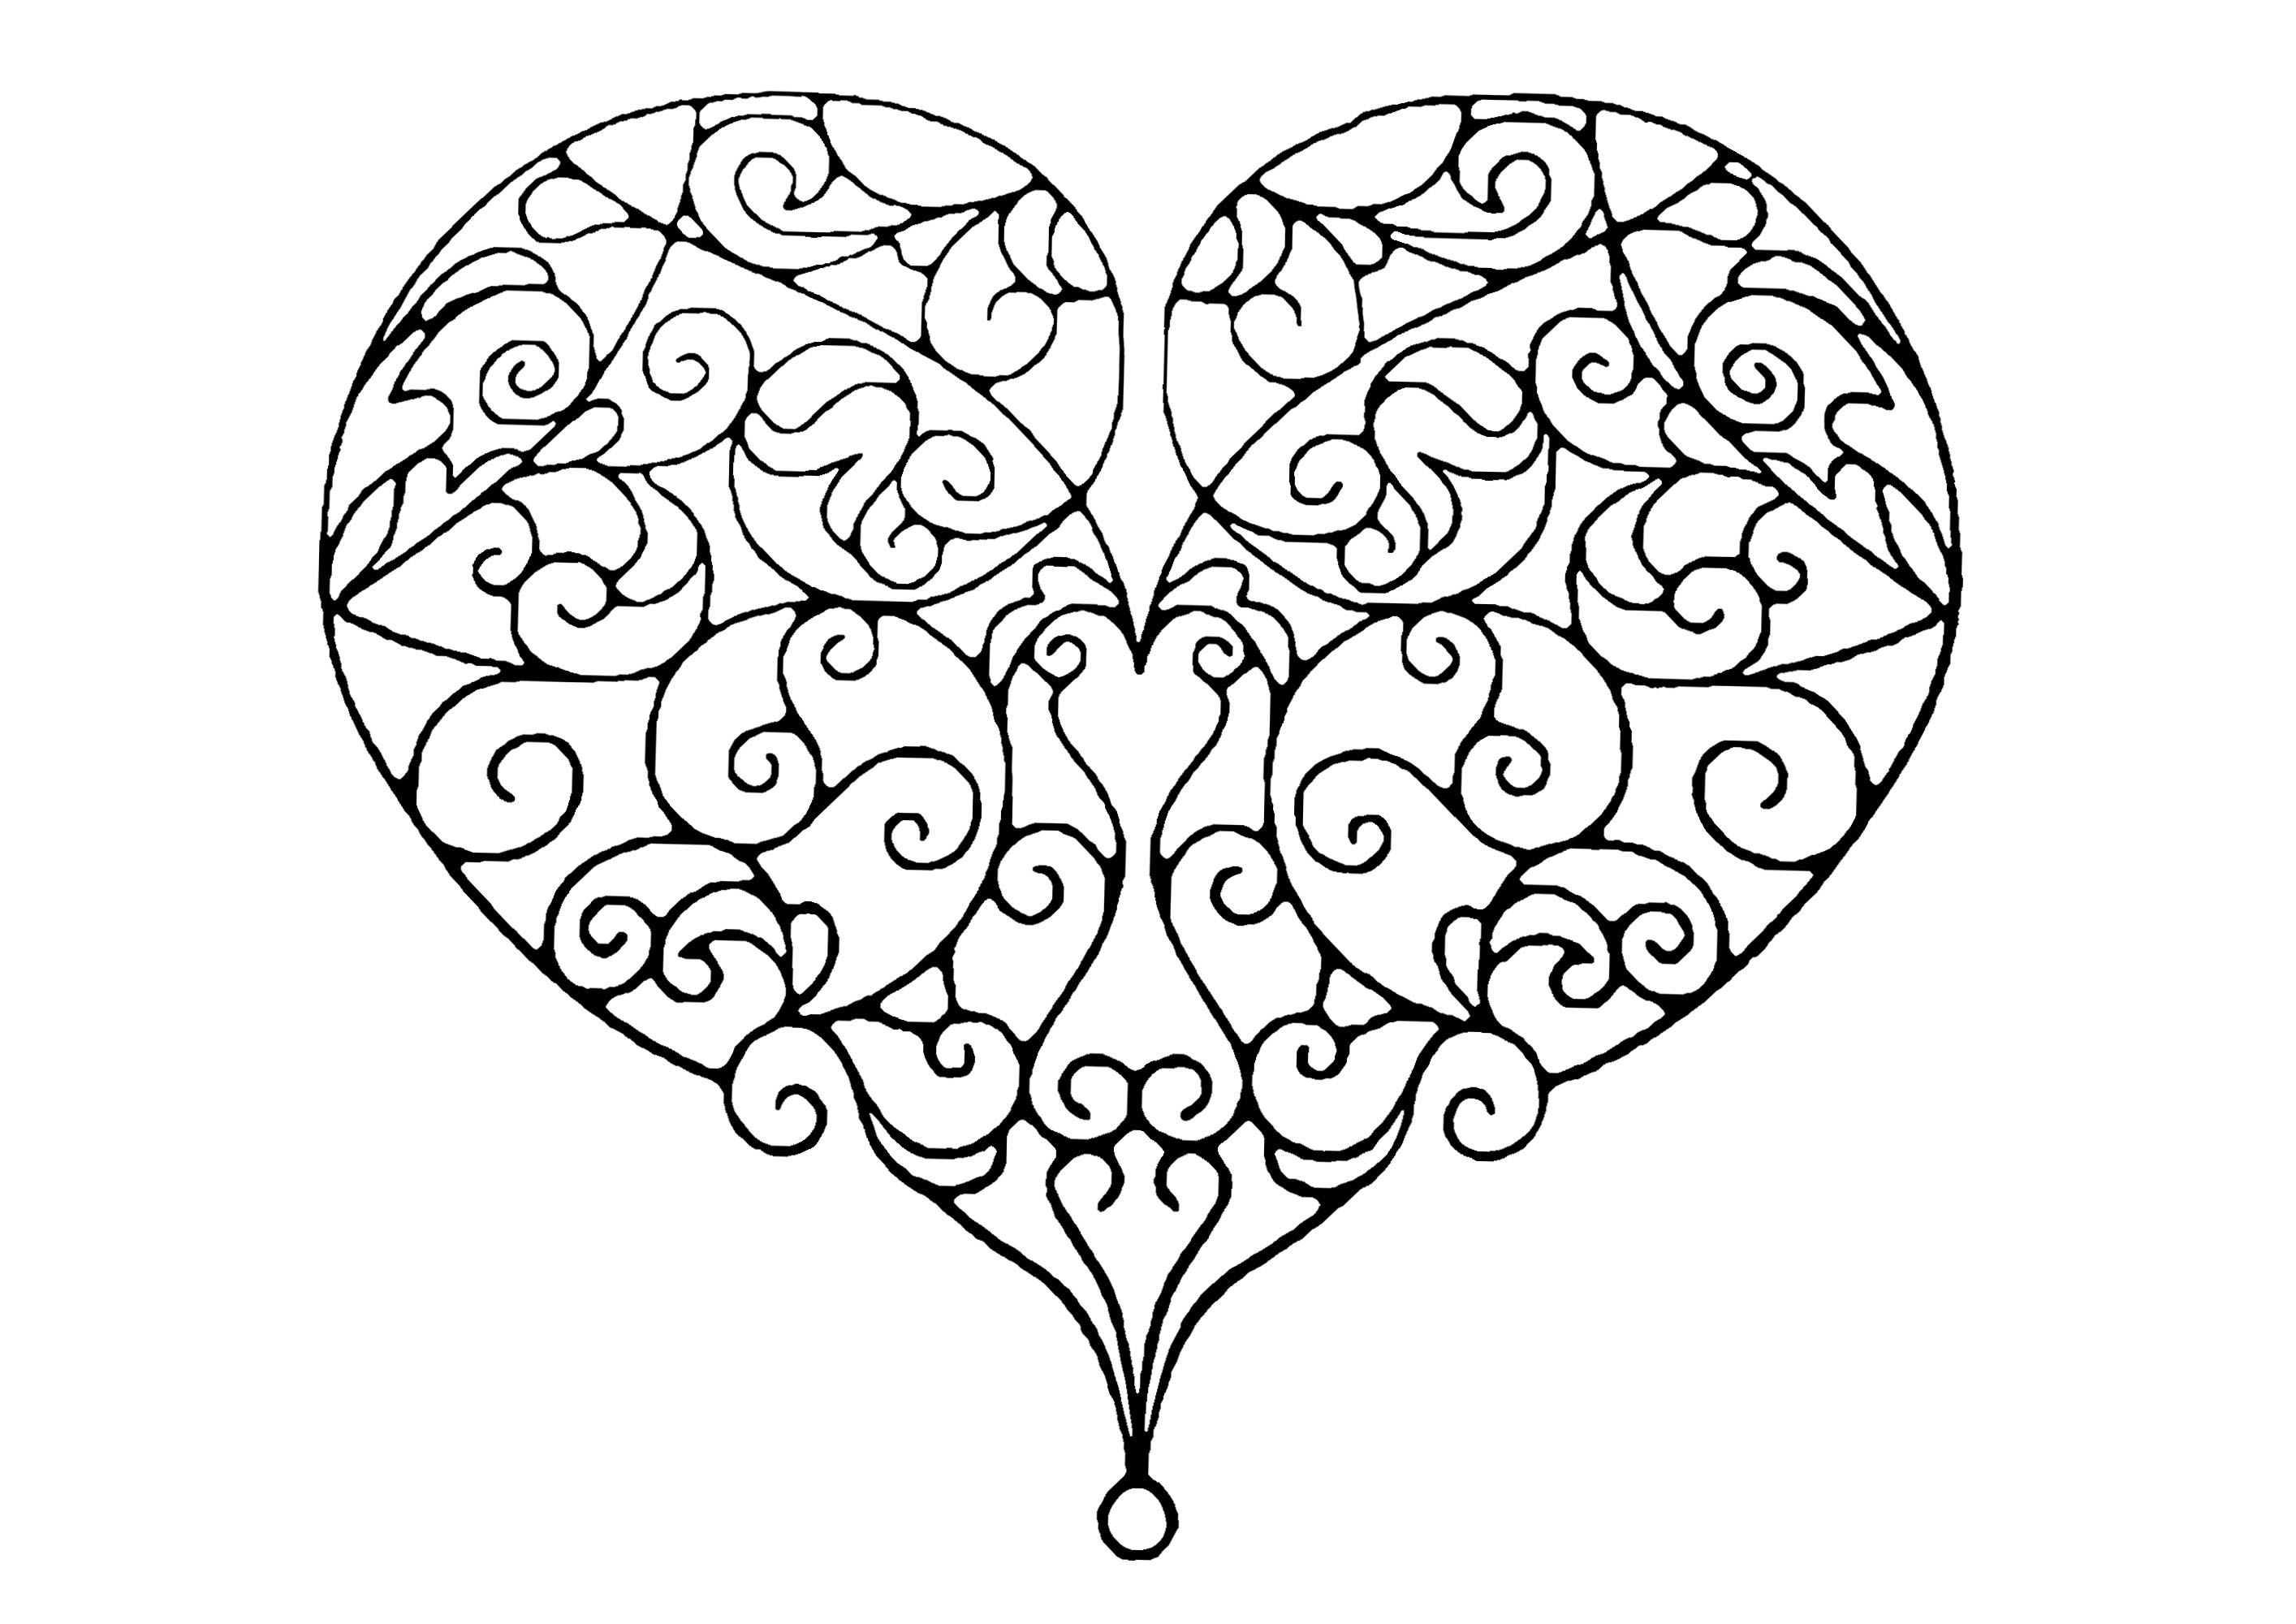 Color this heart created with intertwined lines, Artist : Art. Isabelle